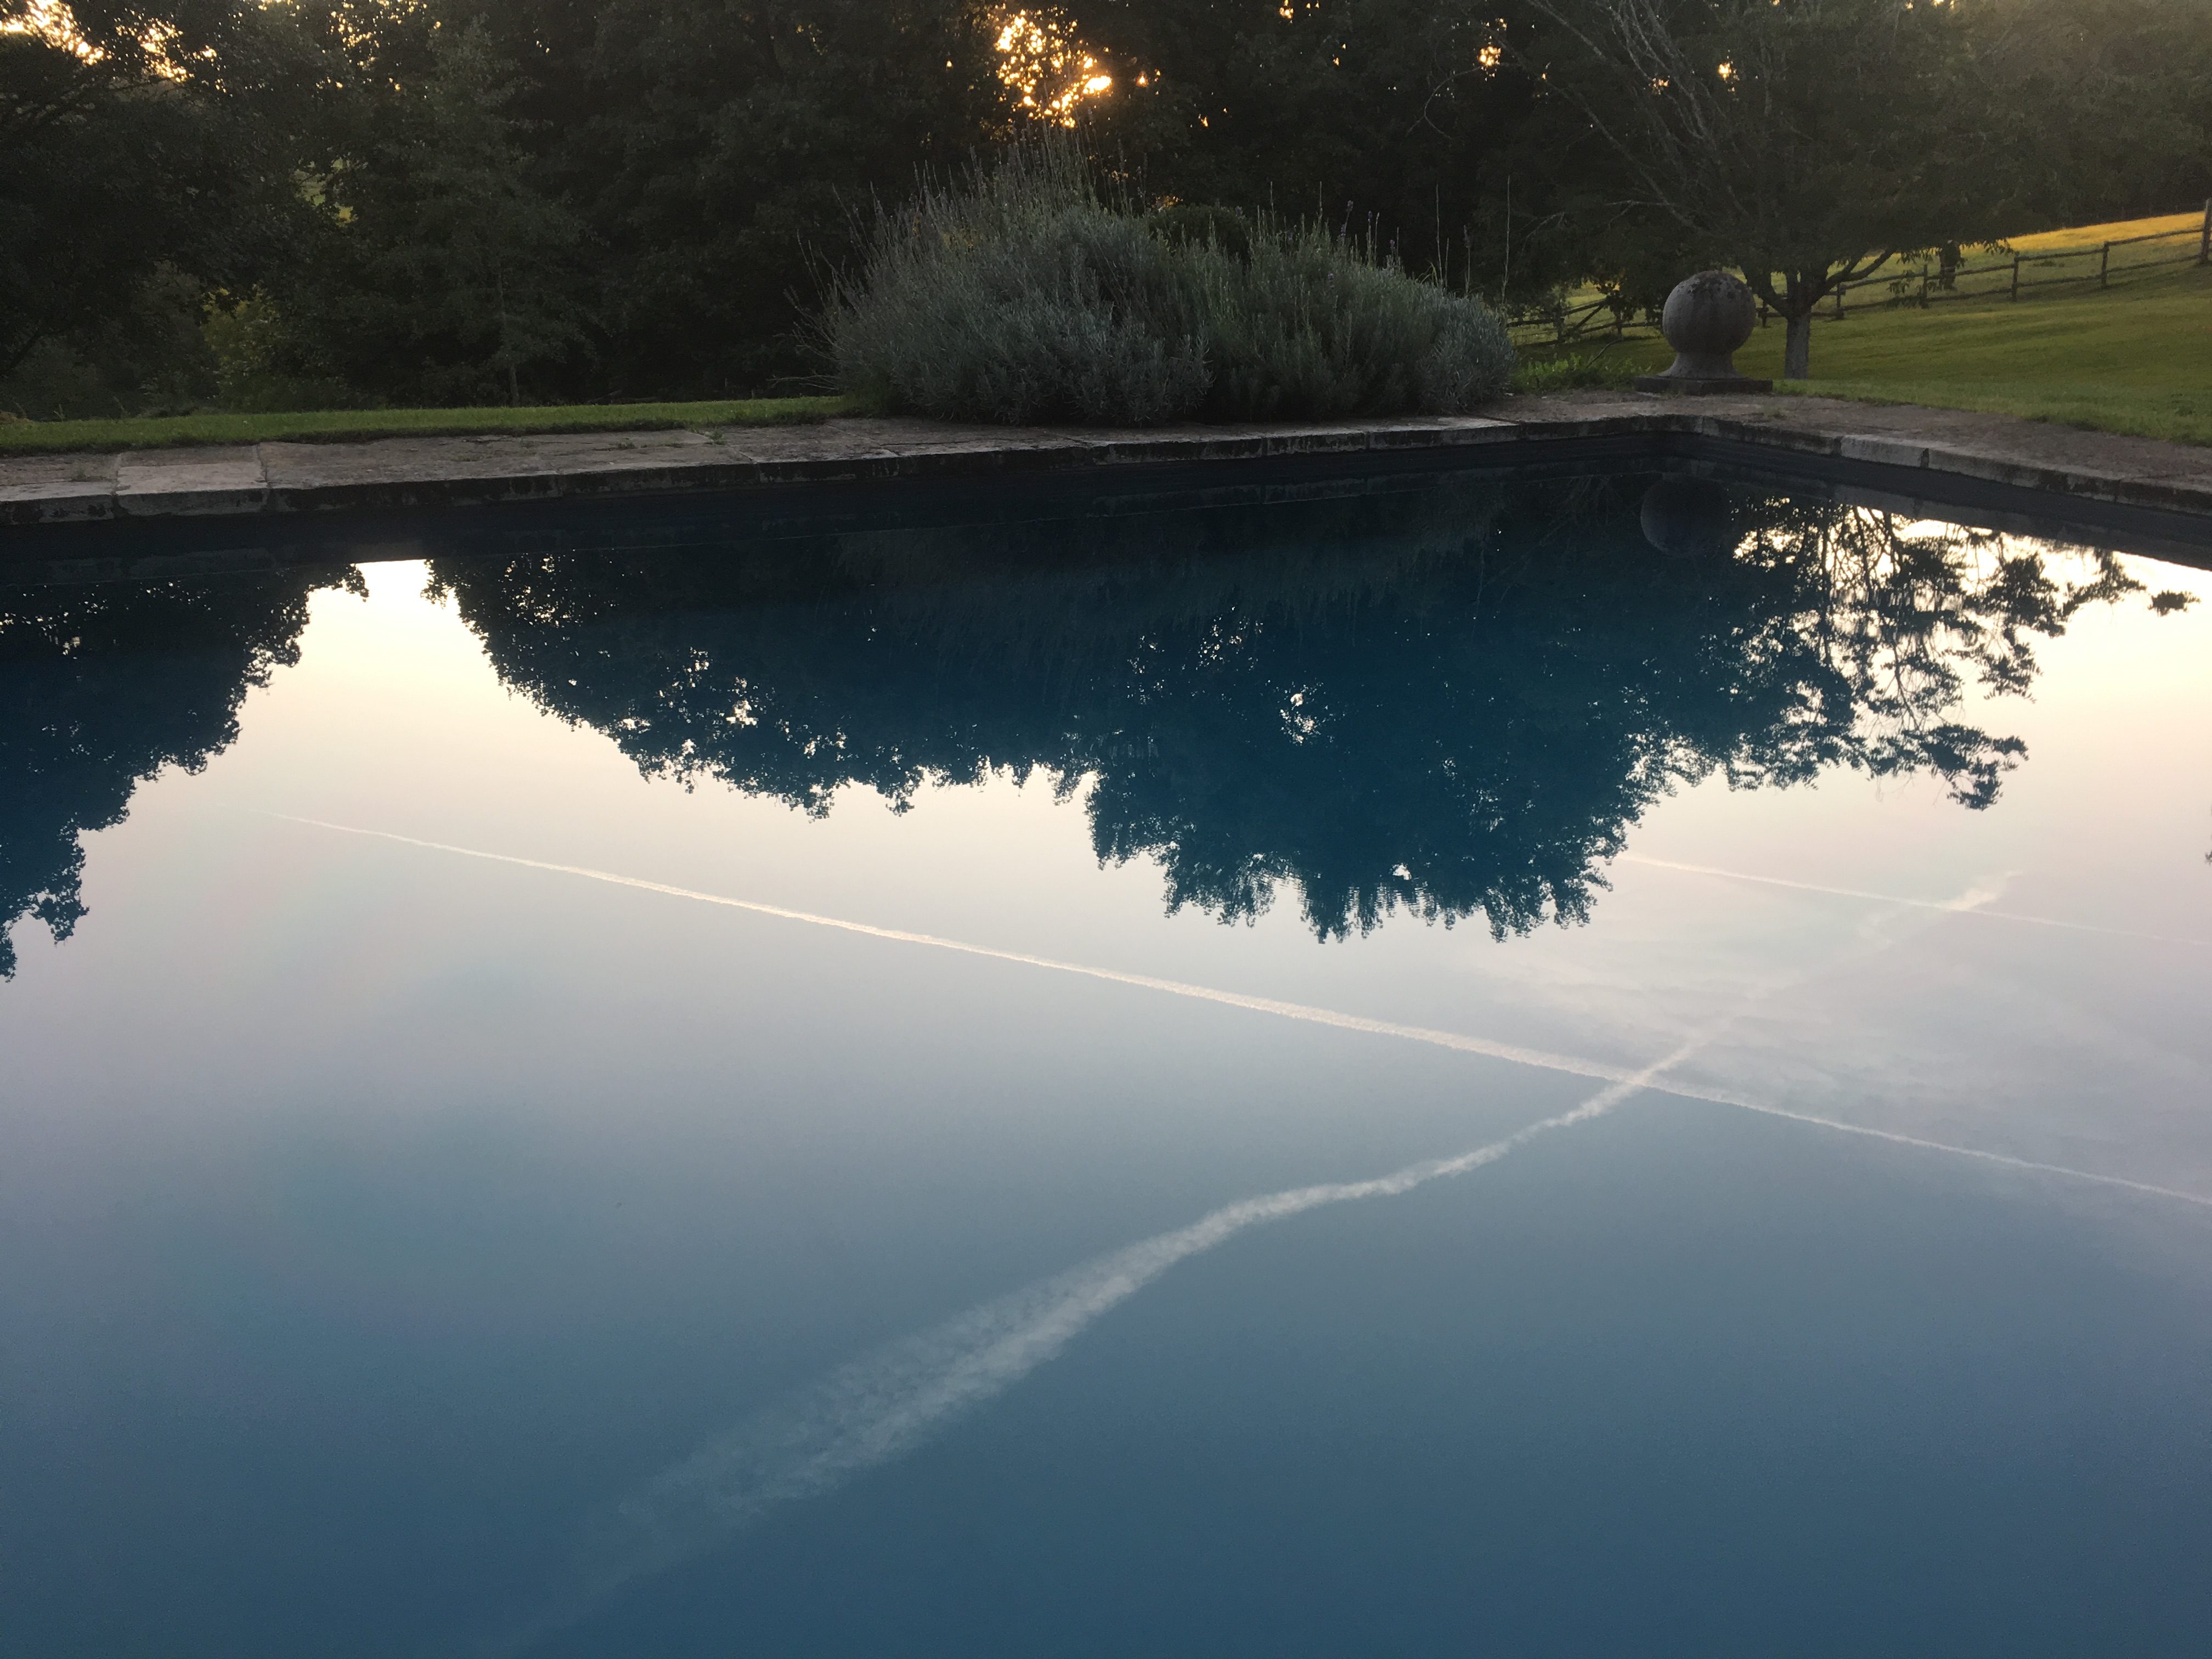 Flight trails from opposite directions cross reflected in the pool